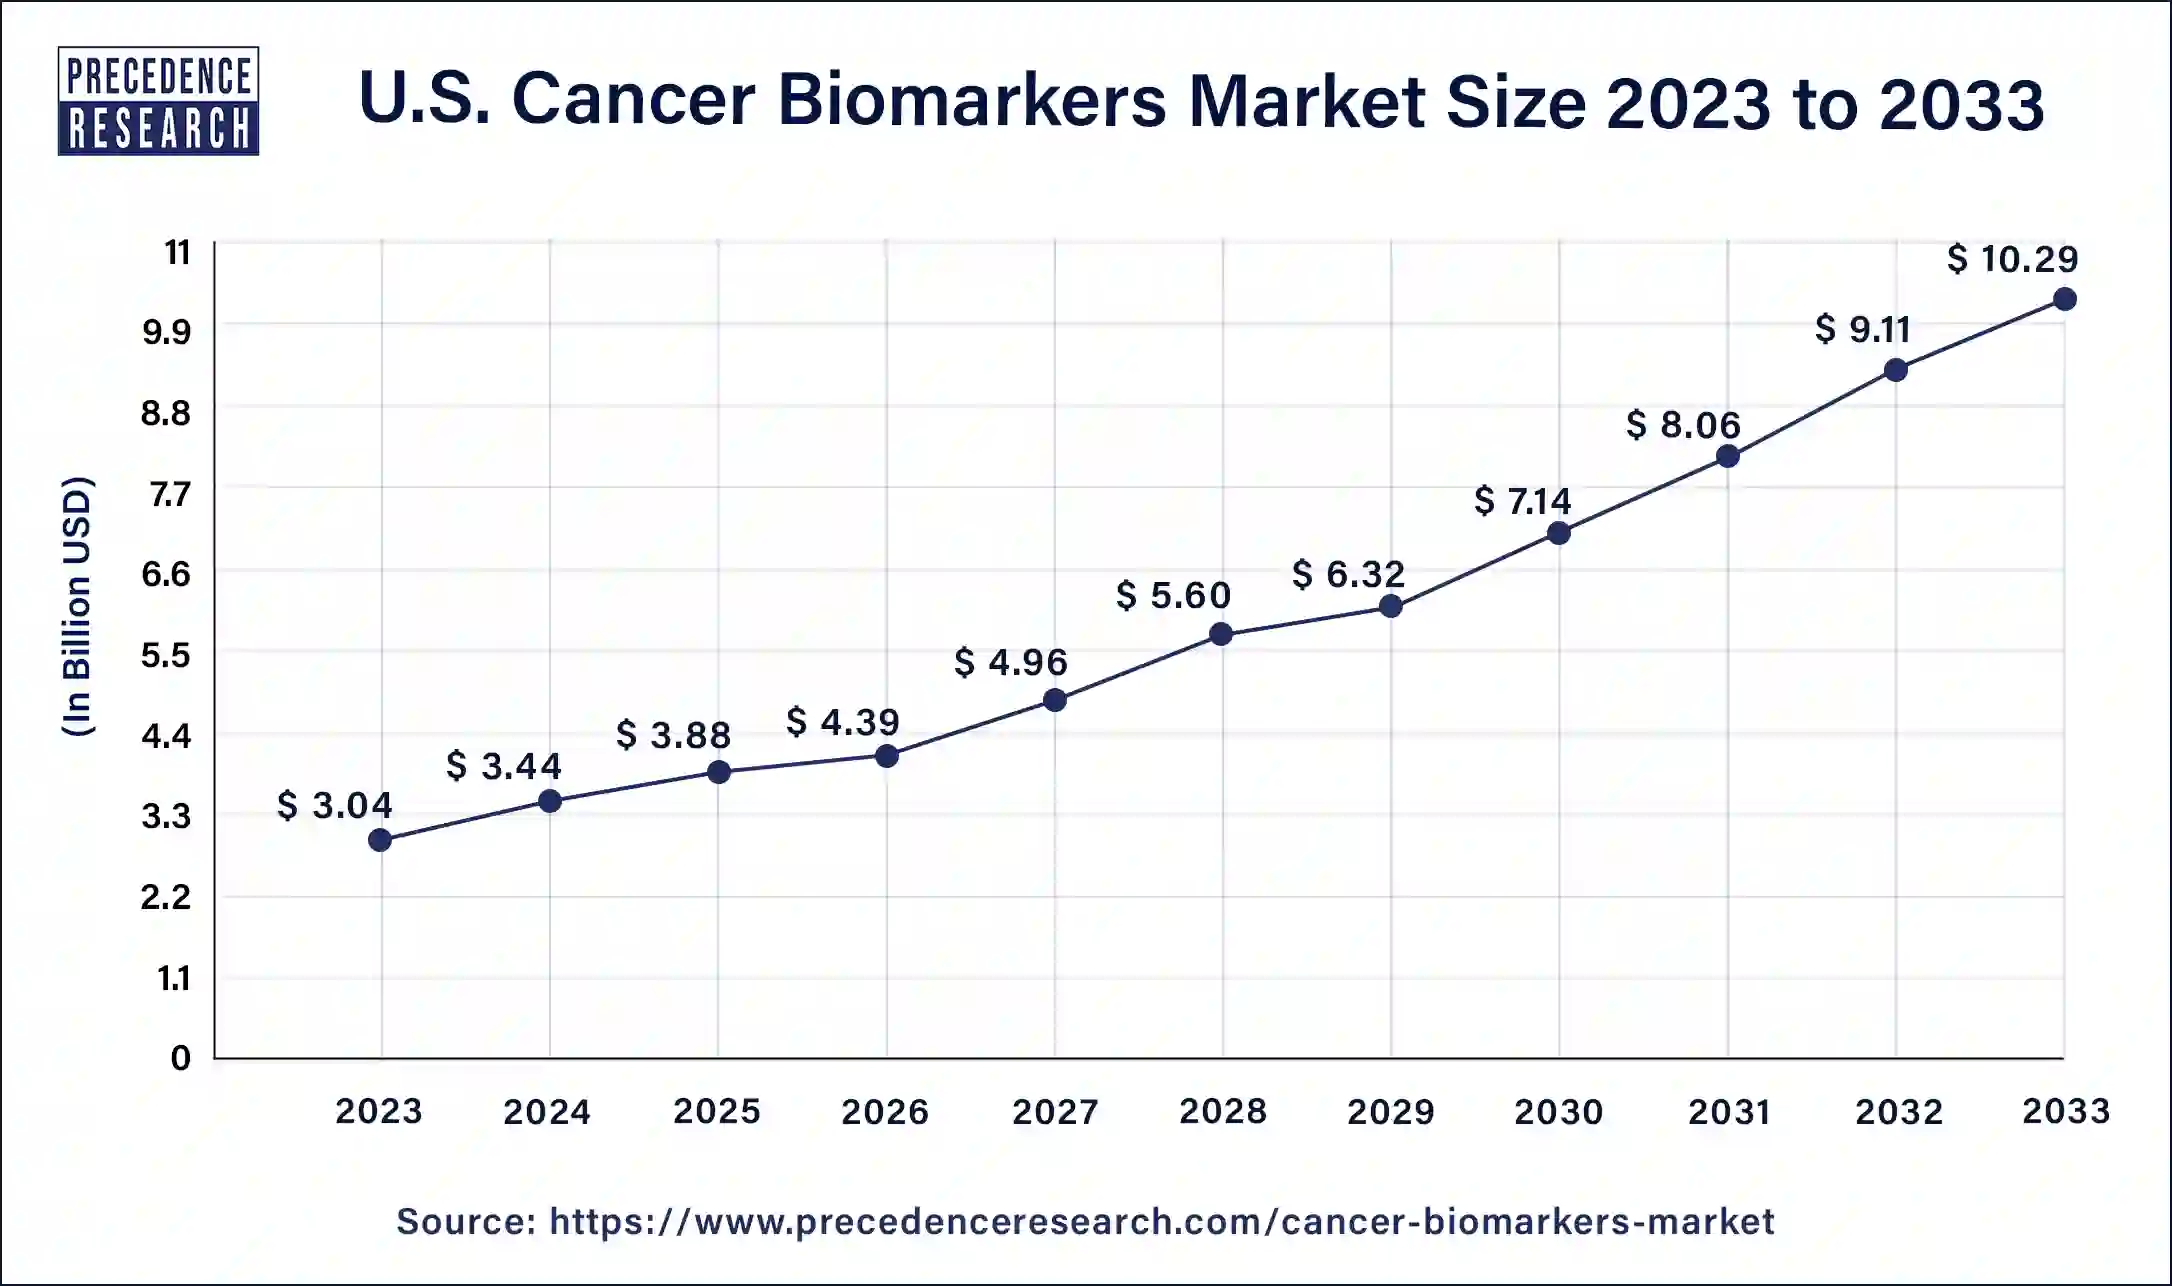 U.S. Cancer Biomarkers Market Size 2024 to 2033